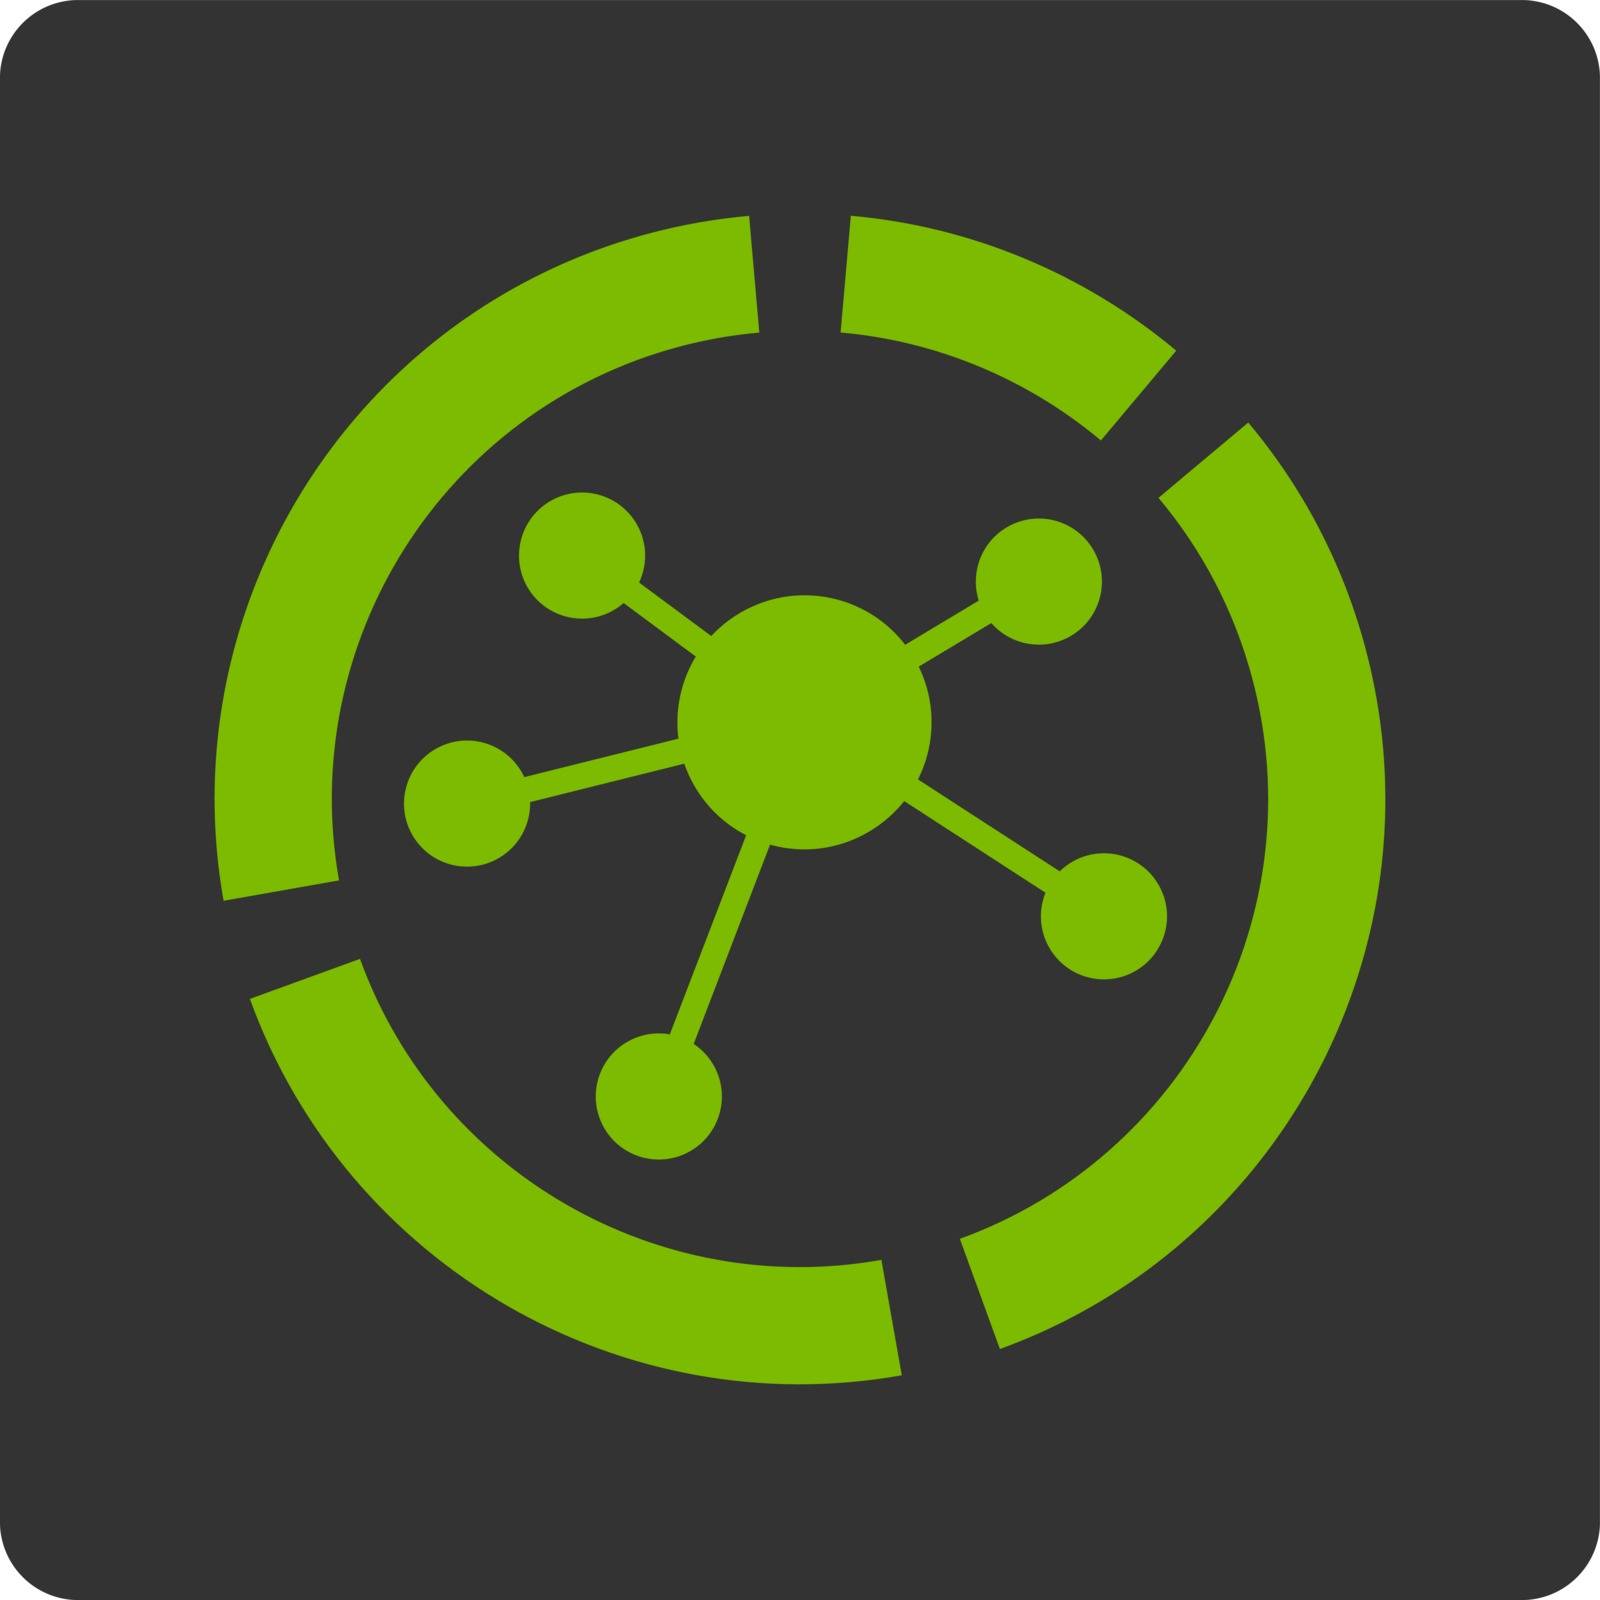 Connections diagram icon by ahasoft